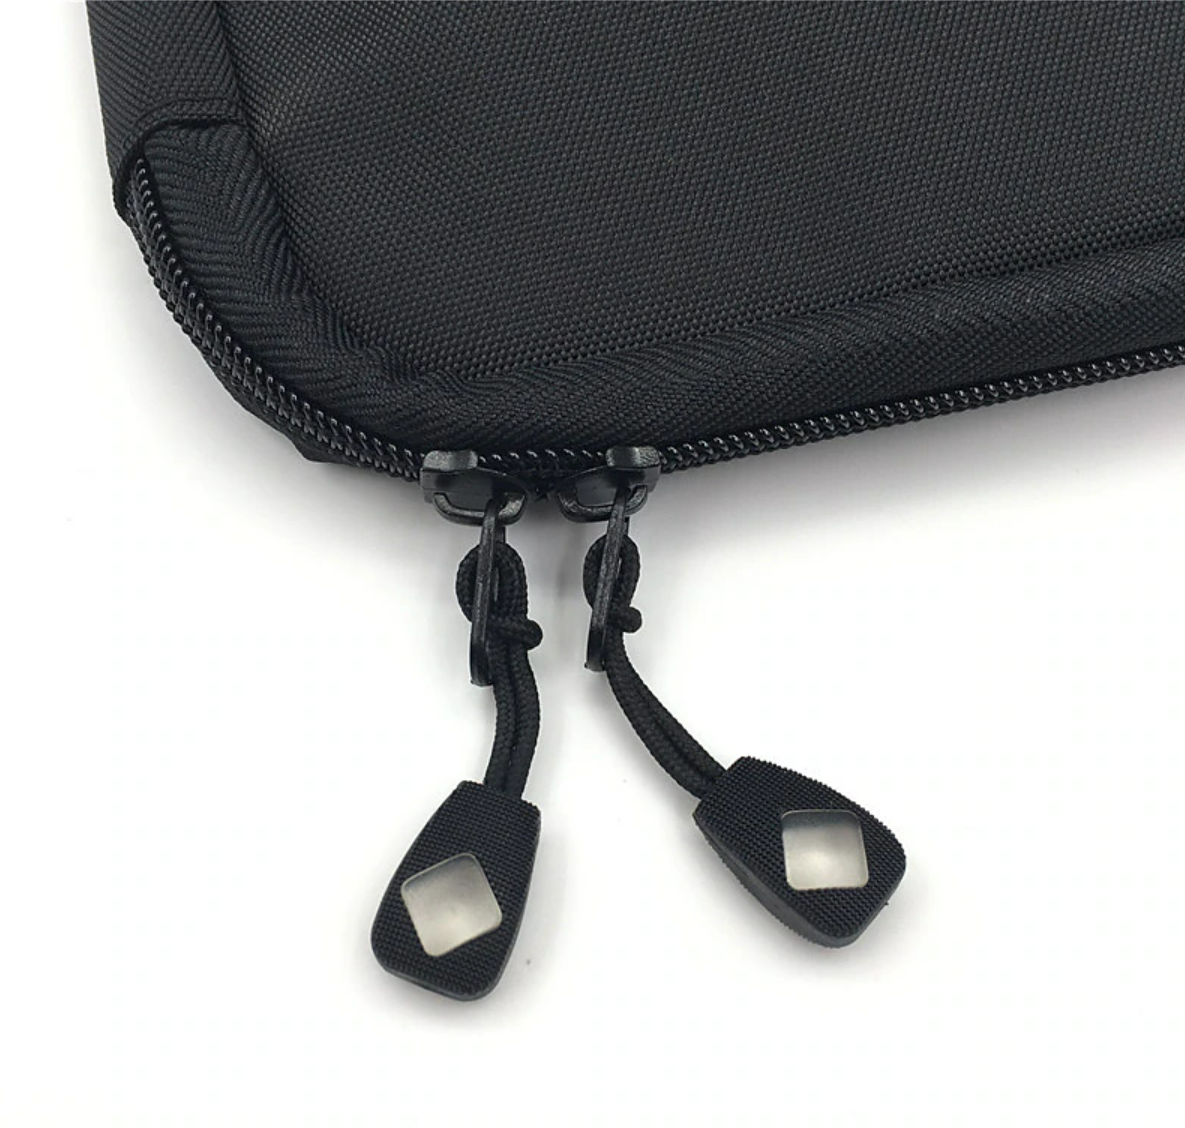 Portable Cable Organizer Bag Travel Digital Electronic Accessories Storage Bag USB Charger Power Bank Holder Cable Case Bags